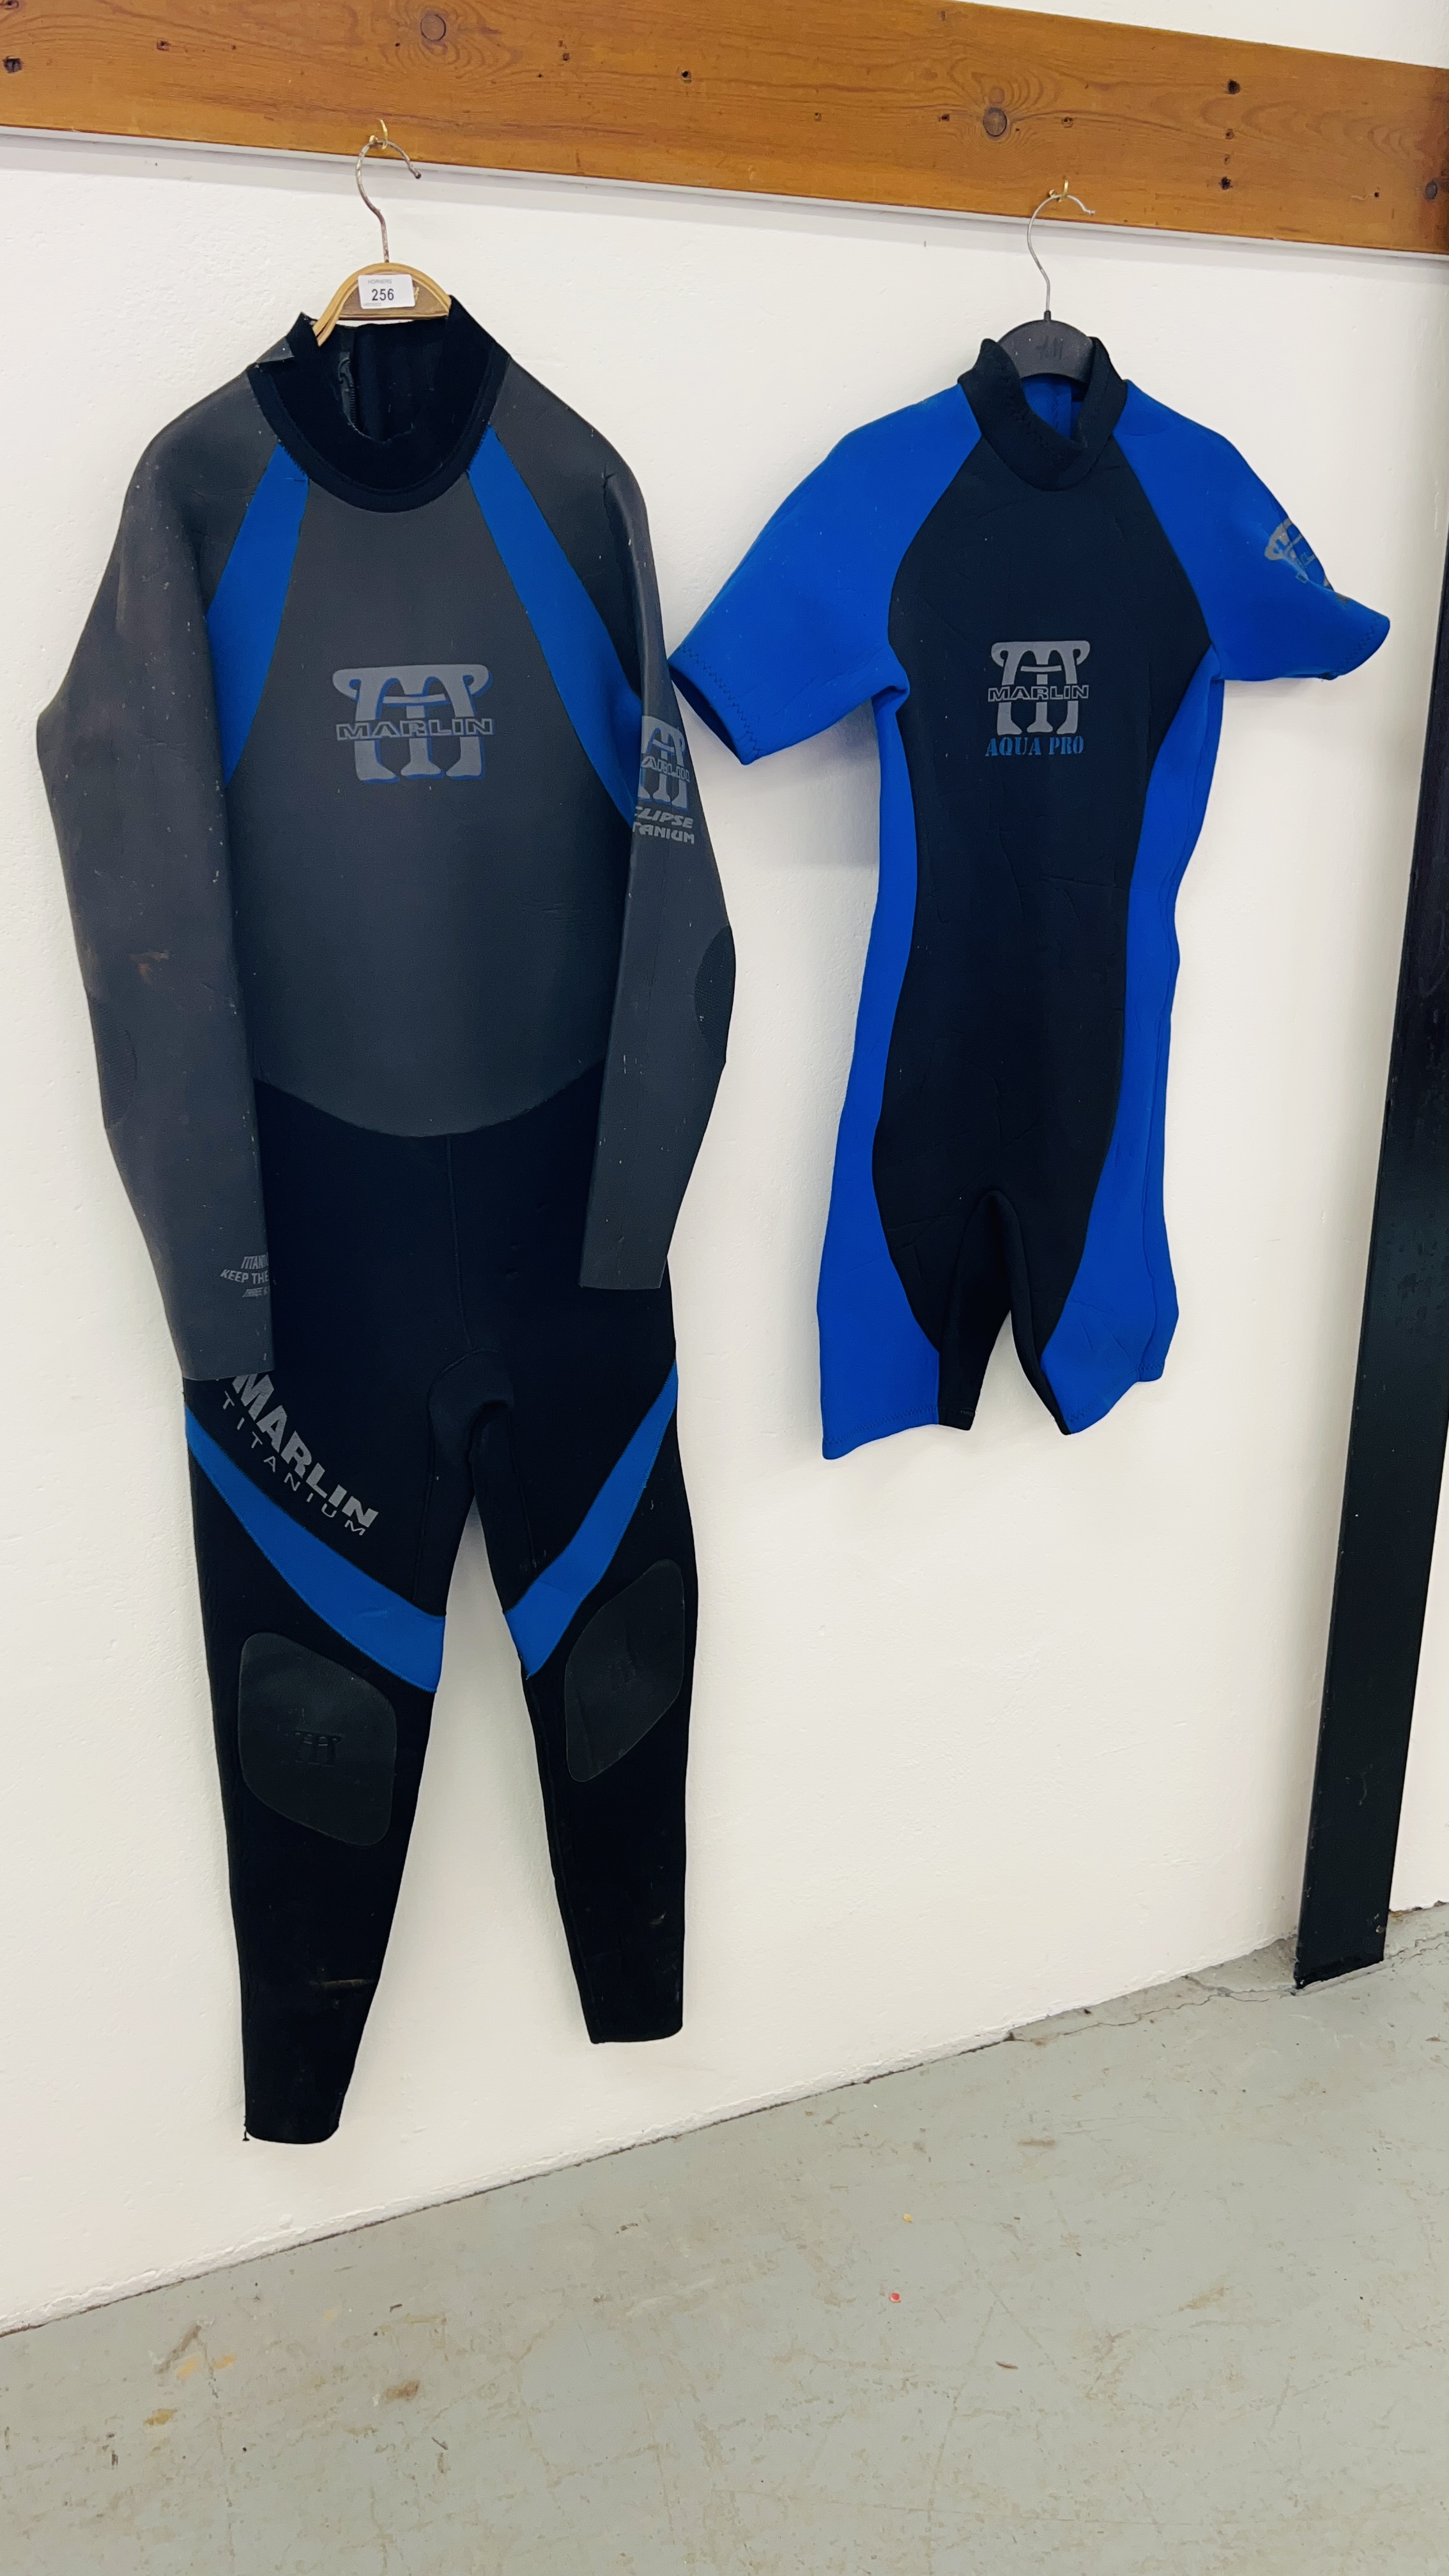 2 X MARLIN GENTS WETSUITS.